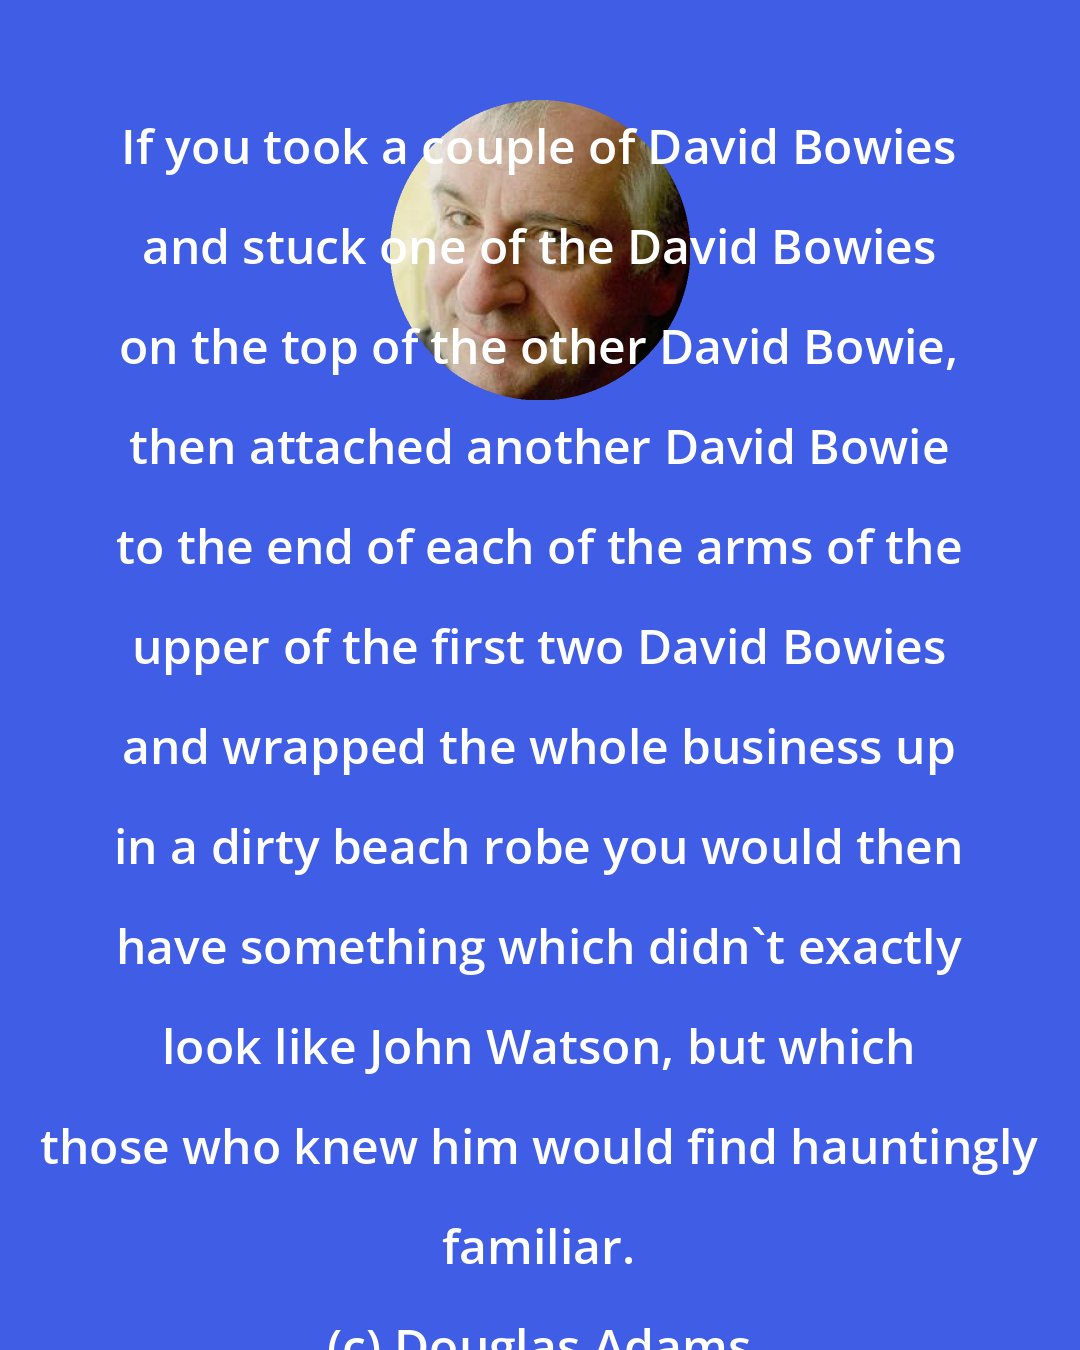 Douglas Adams: If you took a couple of David Bowies and stuck one of the David Bowies on the top of the other David Bowie, then attached another David Bowie to the end of each of the arms of the upper of the first two David Bowies and wrapped the whole business up in a dirty beach robe you would then have something which didn't exactly look like John Watson, but which those who knew him would find hauntingly familiar.